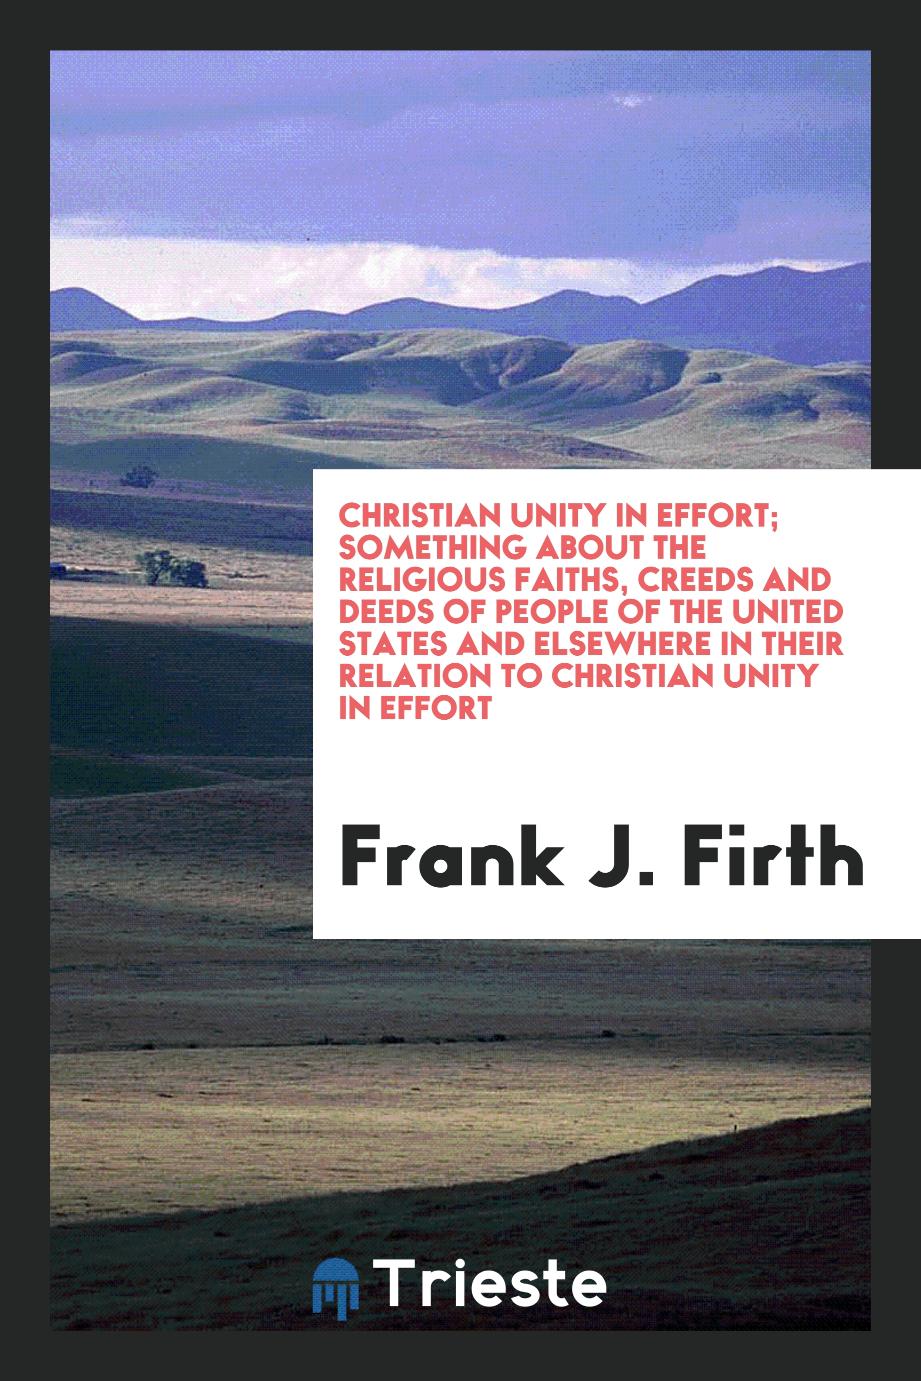 Christian unity in effort; something about the religious faiths, creeds and deeds of people of the United States and elsewhere in their relation to Christian unity in effort